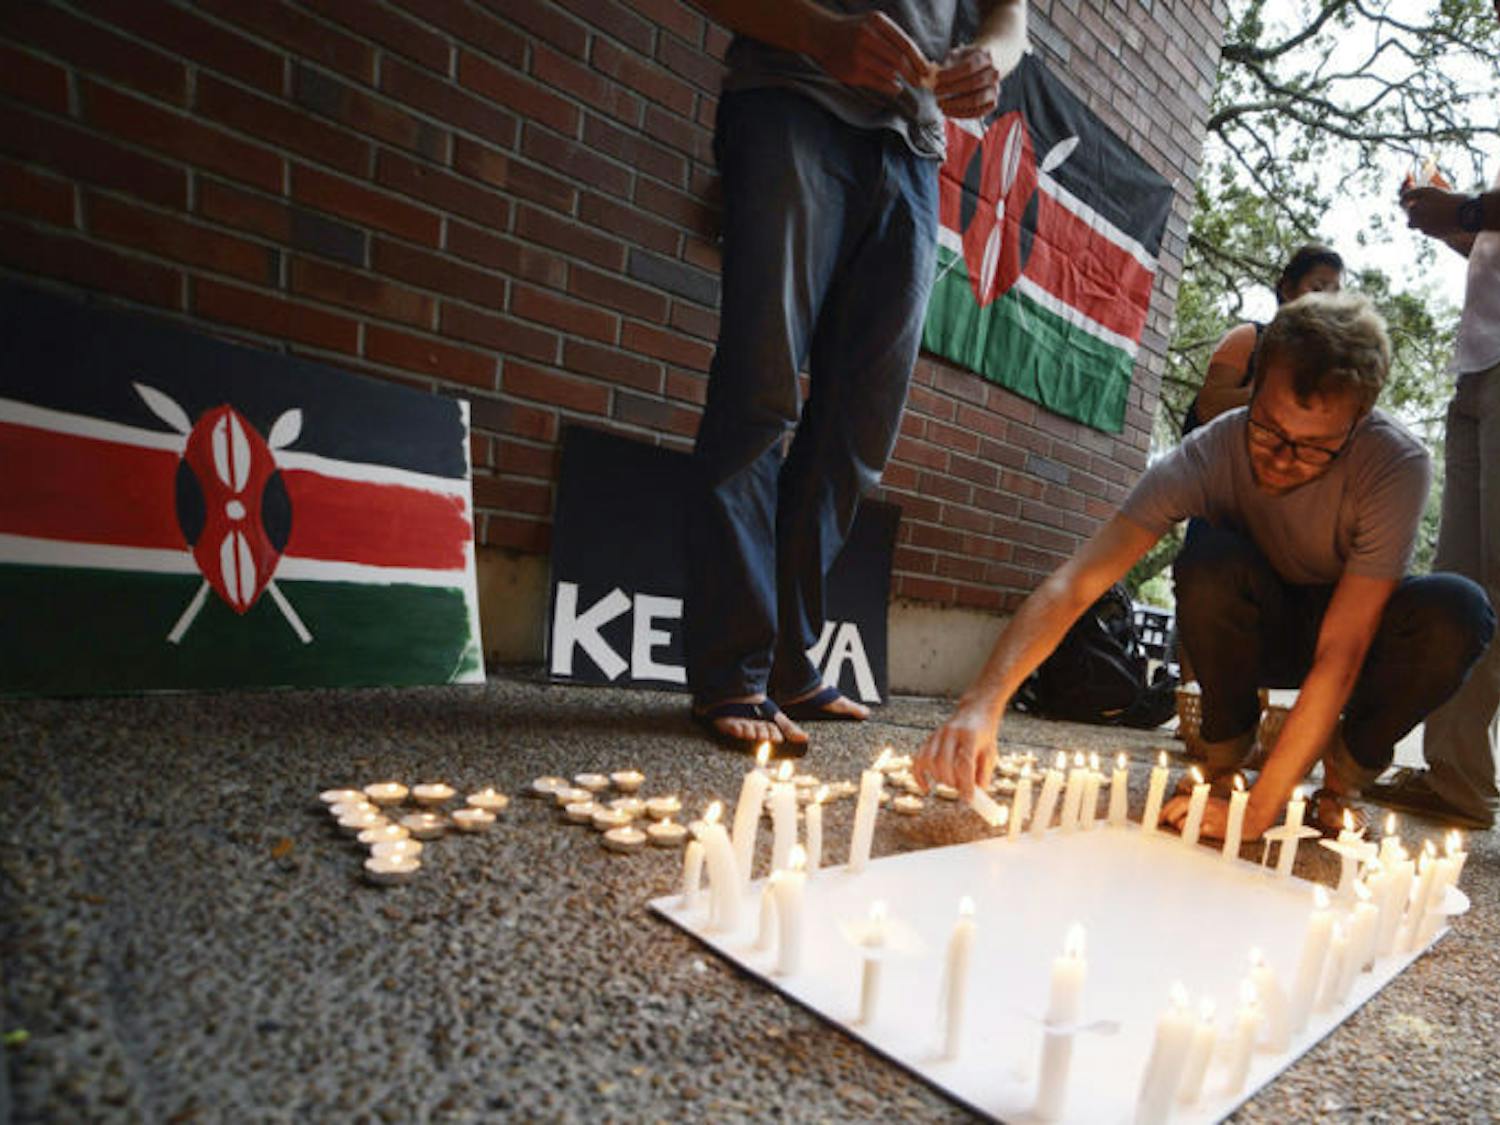 Ph.D. student and Department of Environmental and Global Health research coordinator John Anderson, 34, lights a candle dedicated to Kenya mall-shooting victims on Turlington Plaza Monday.